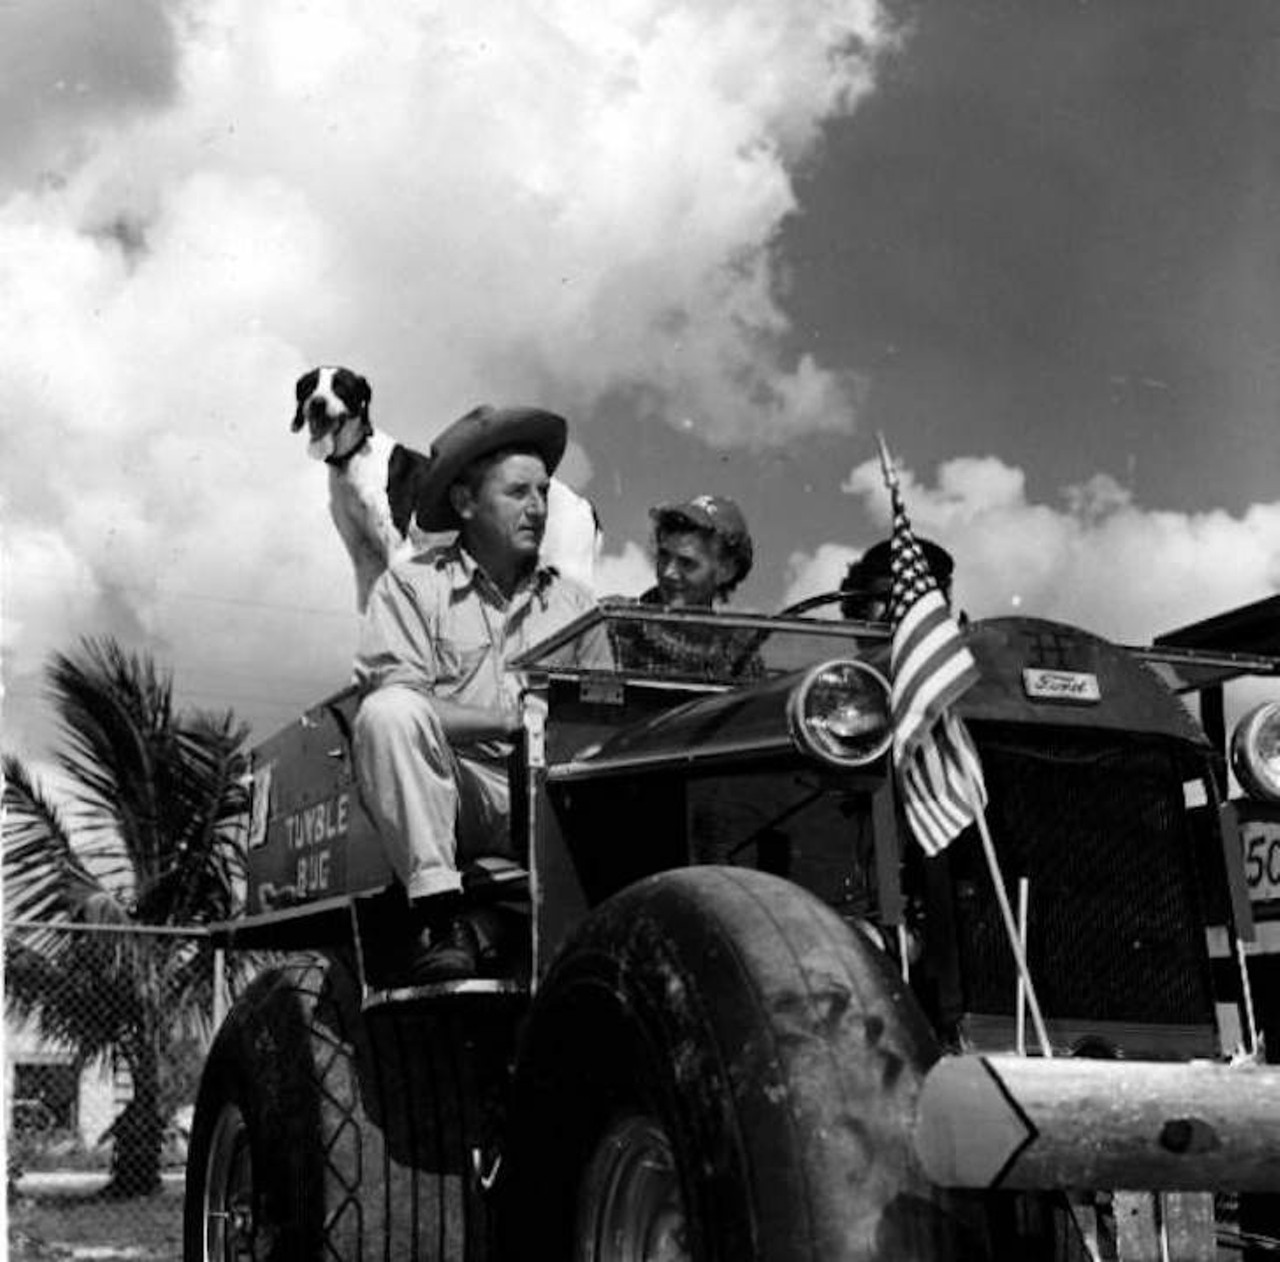 Eddie Frank at Naples' swamp buggy races in Naples, Florida, photographed on Oct. 28, 1950. Eddie Frank's "Tumber Bug" won second place in Naples' Swamp Buggy Day parade.